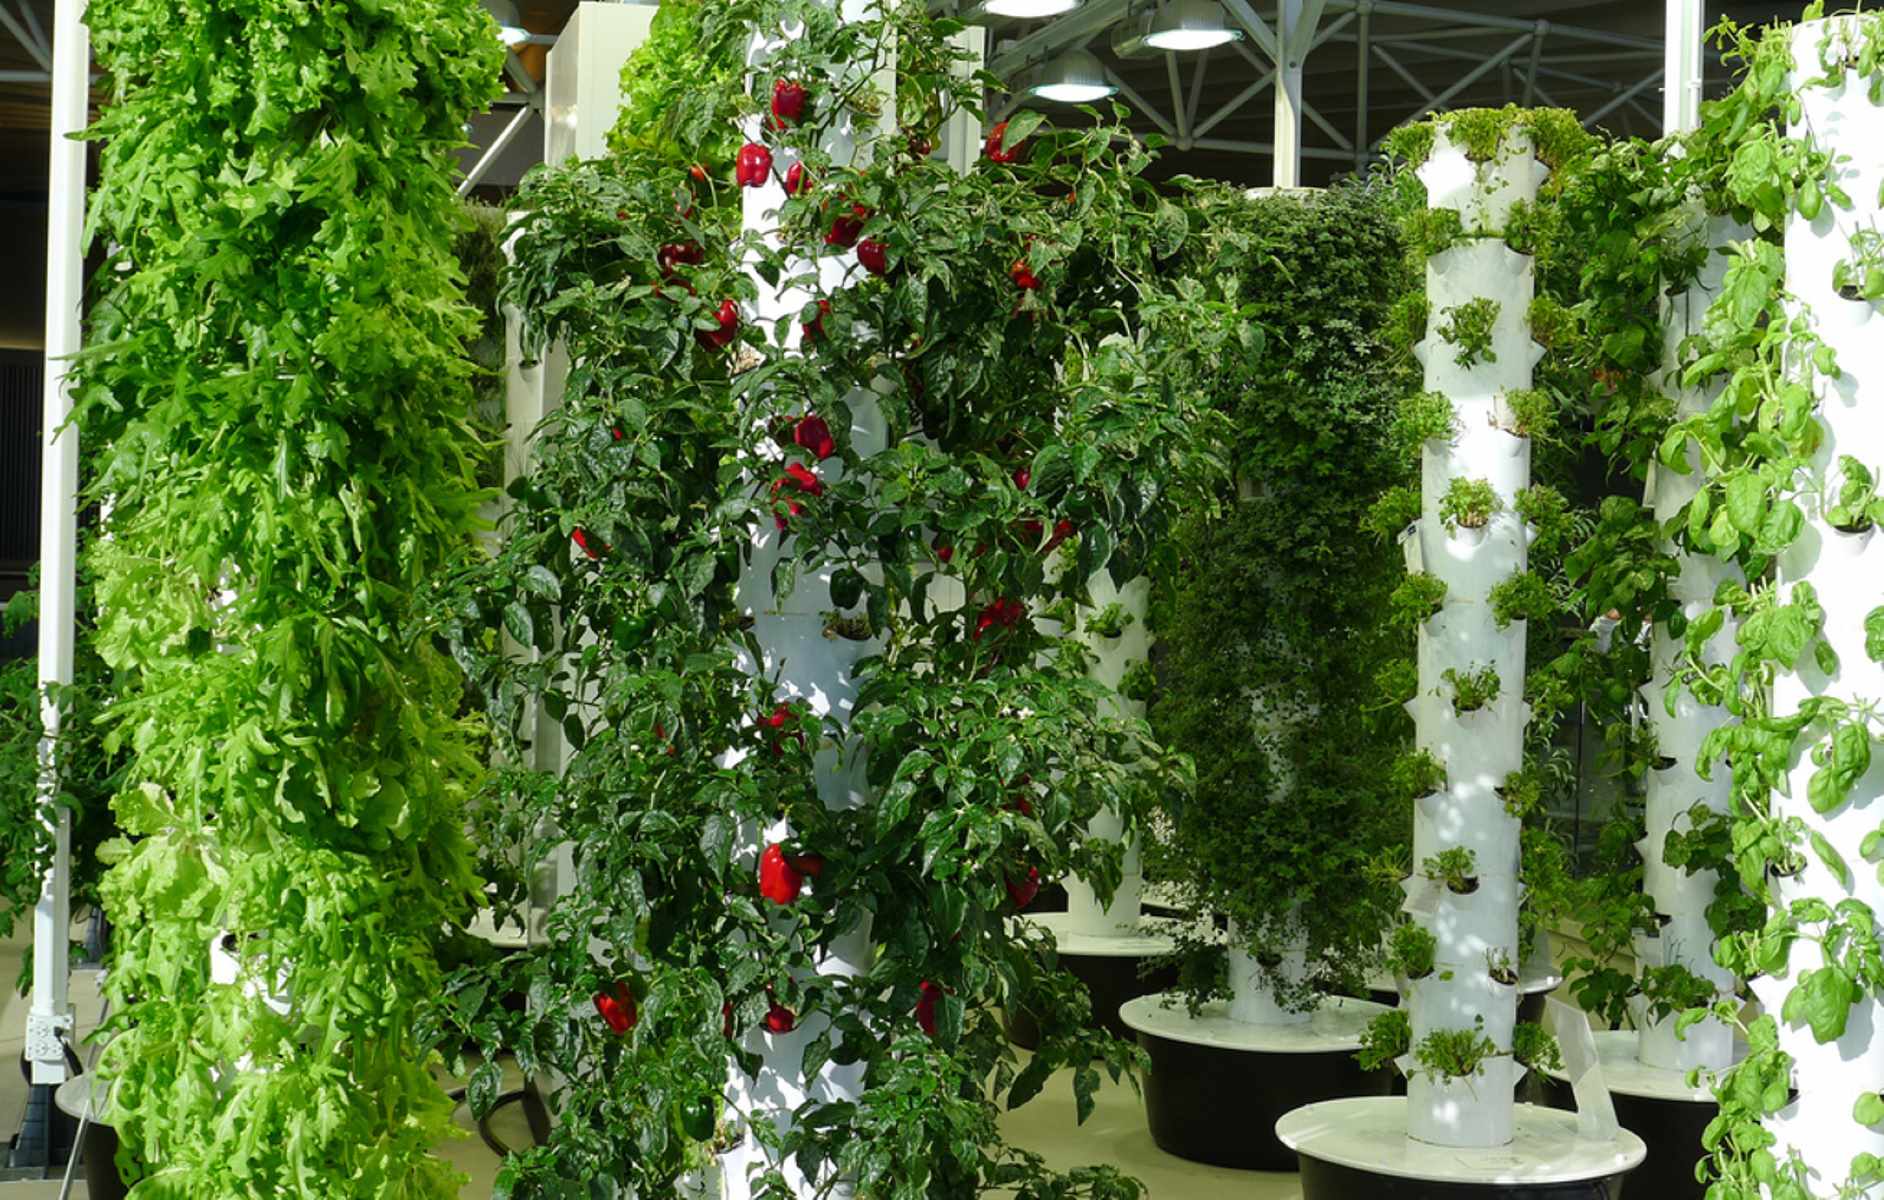 What Vegetables Can You Grow In A Vertical Garden?